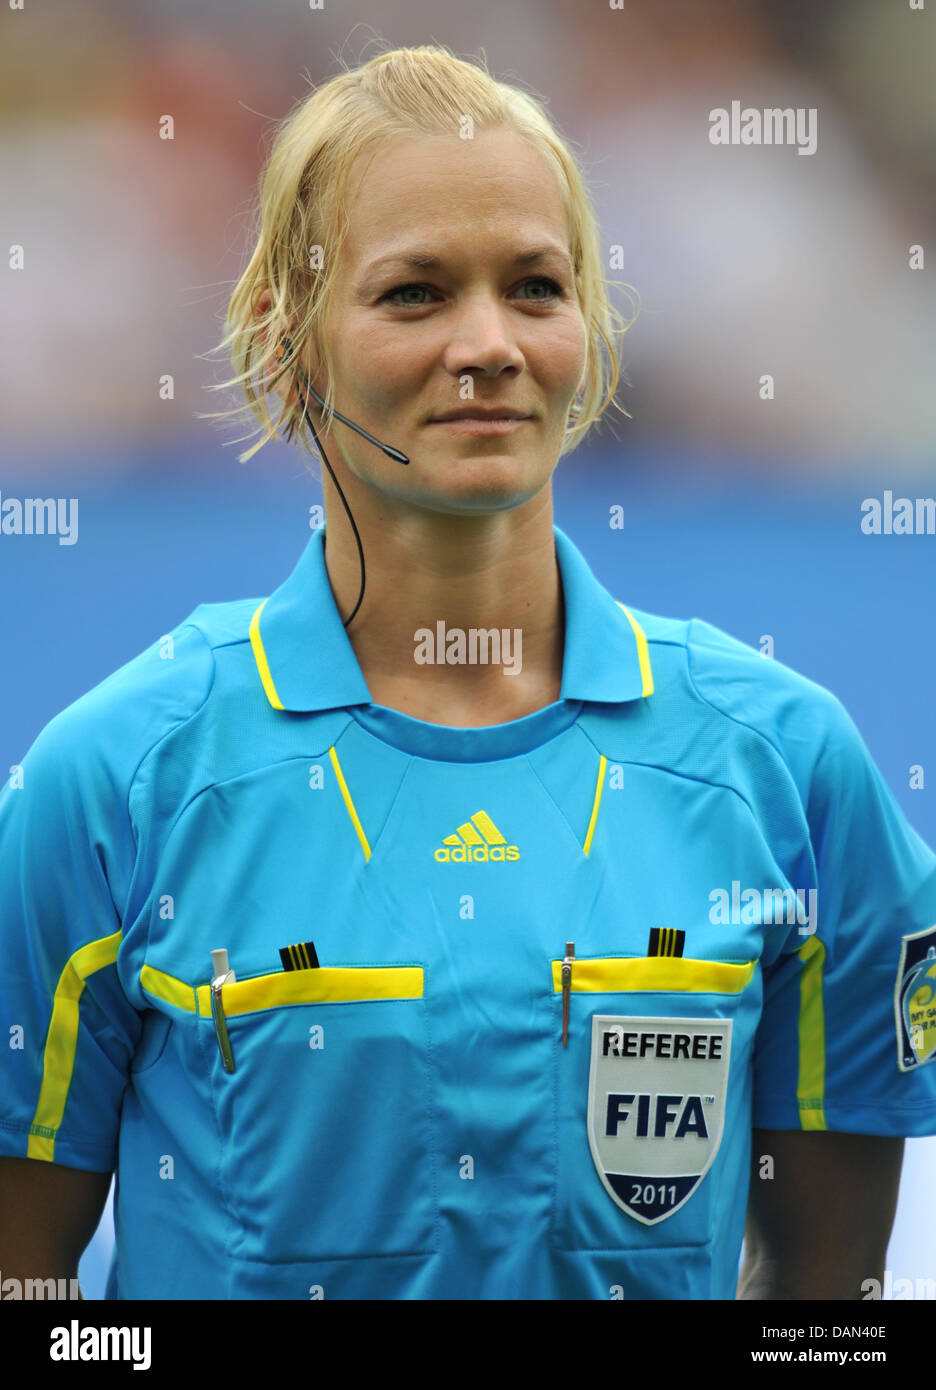 German referee Bibiana Steinhaus is pictured prior to the Group D match Equatorial Guinea against Brazil of FIFA Women's World Cup soccer tournament at the FIFA Women's World Cup Stadium in Frankfurt, Germany, 06 July 2011. Foto: Arne Dedert dpa/lhe Stock Photo